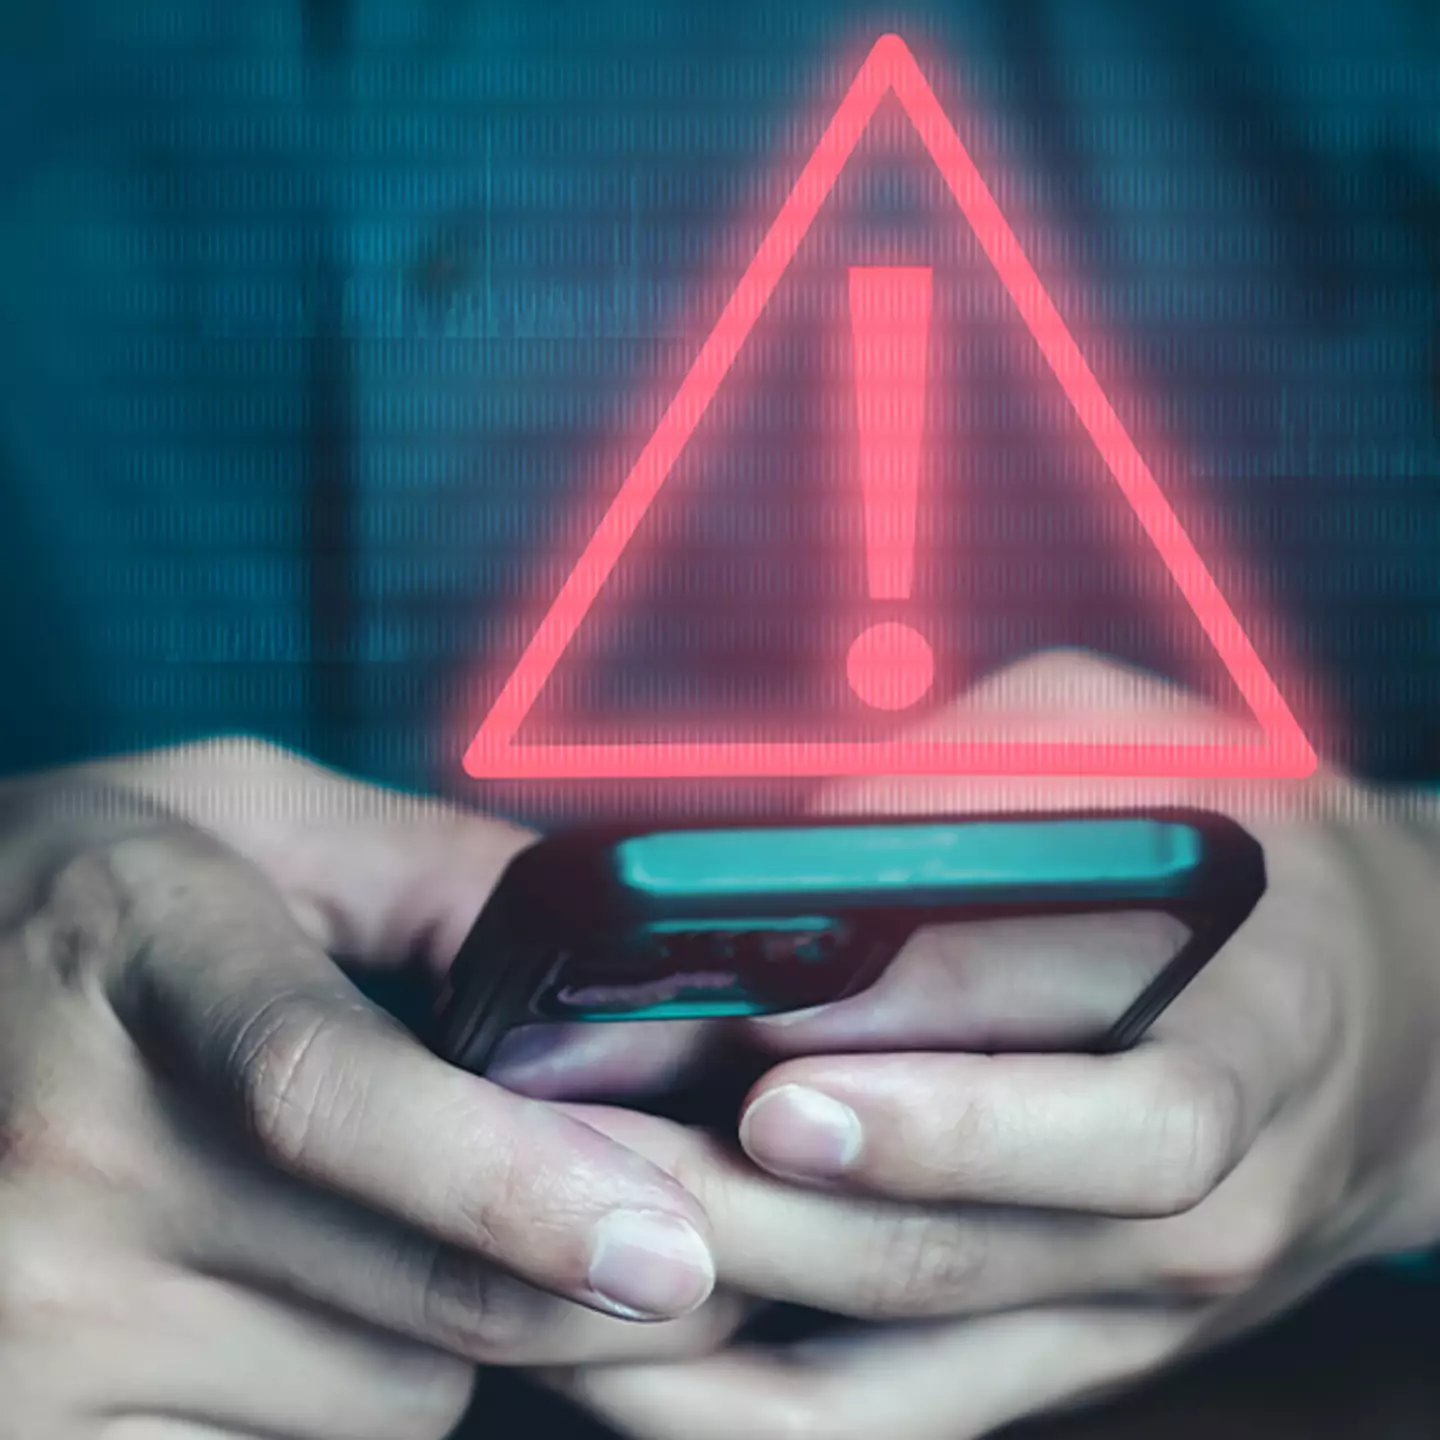 10 common things you should never store in your smartphone to protect yourself from criminals